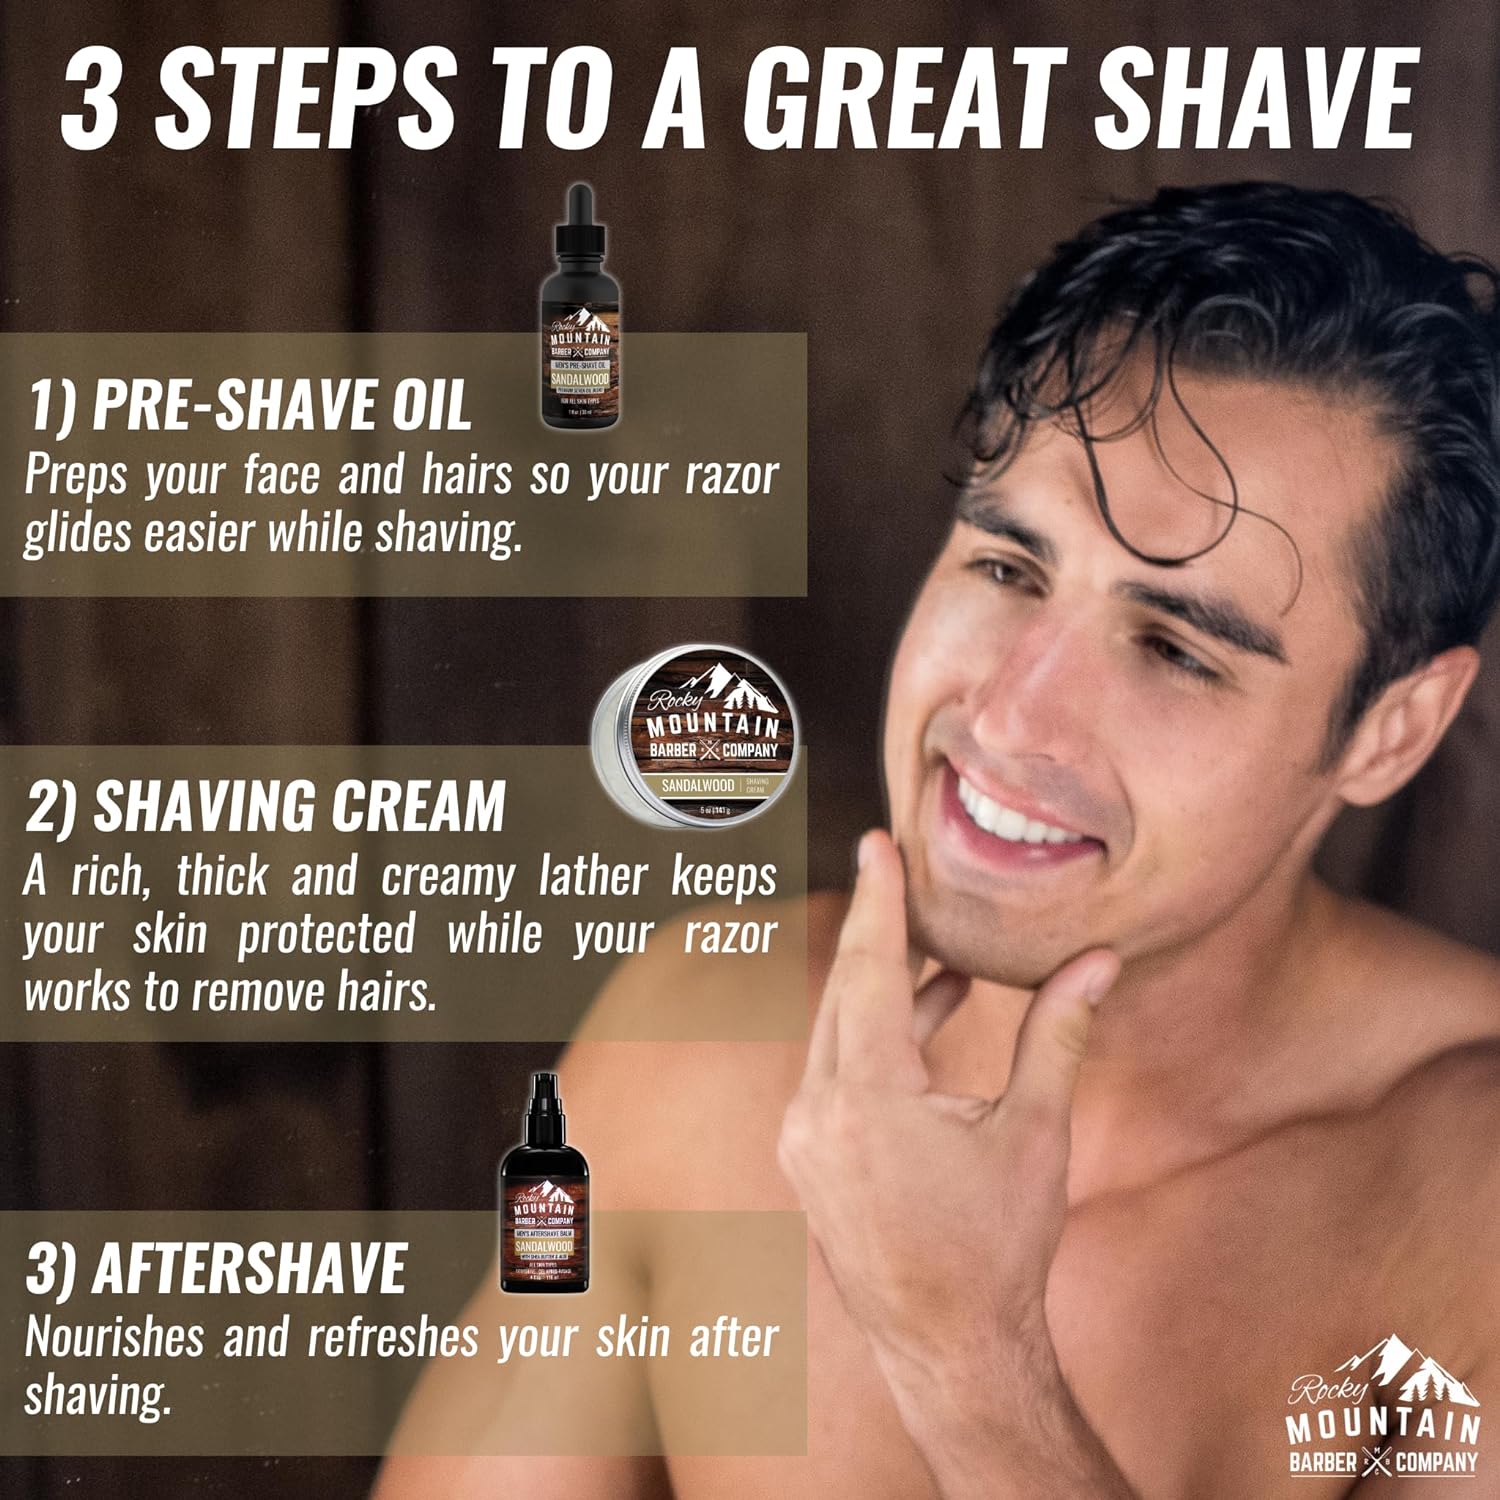 Shaving Cream for Men - With Natural Sandalwood Essential Oil - 5 oz Hydrating, Anti-inflammatory Rich & Thick Lather for Sensitive Skin & All Skin Types by Rocky Mountain Barber Company - 5 Ounce - image 4 of 8